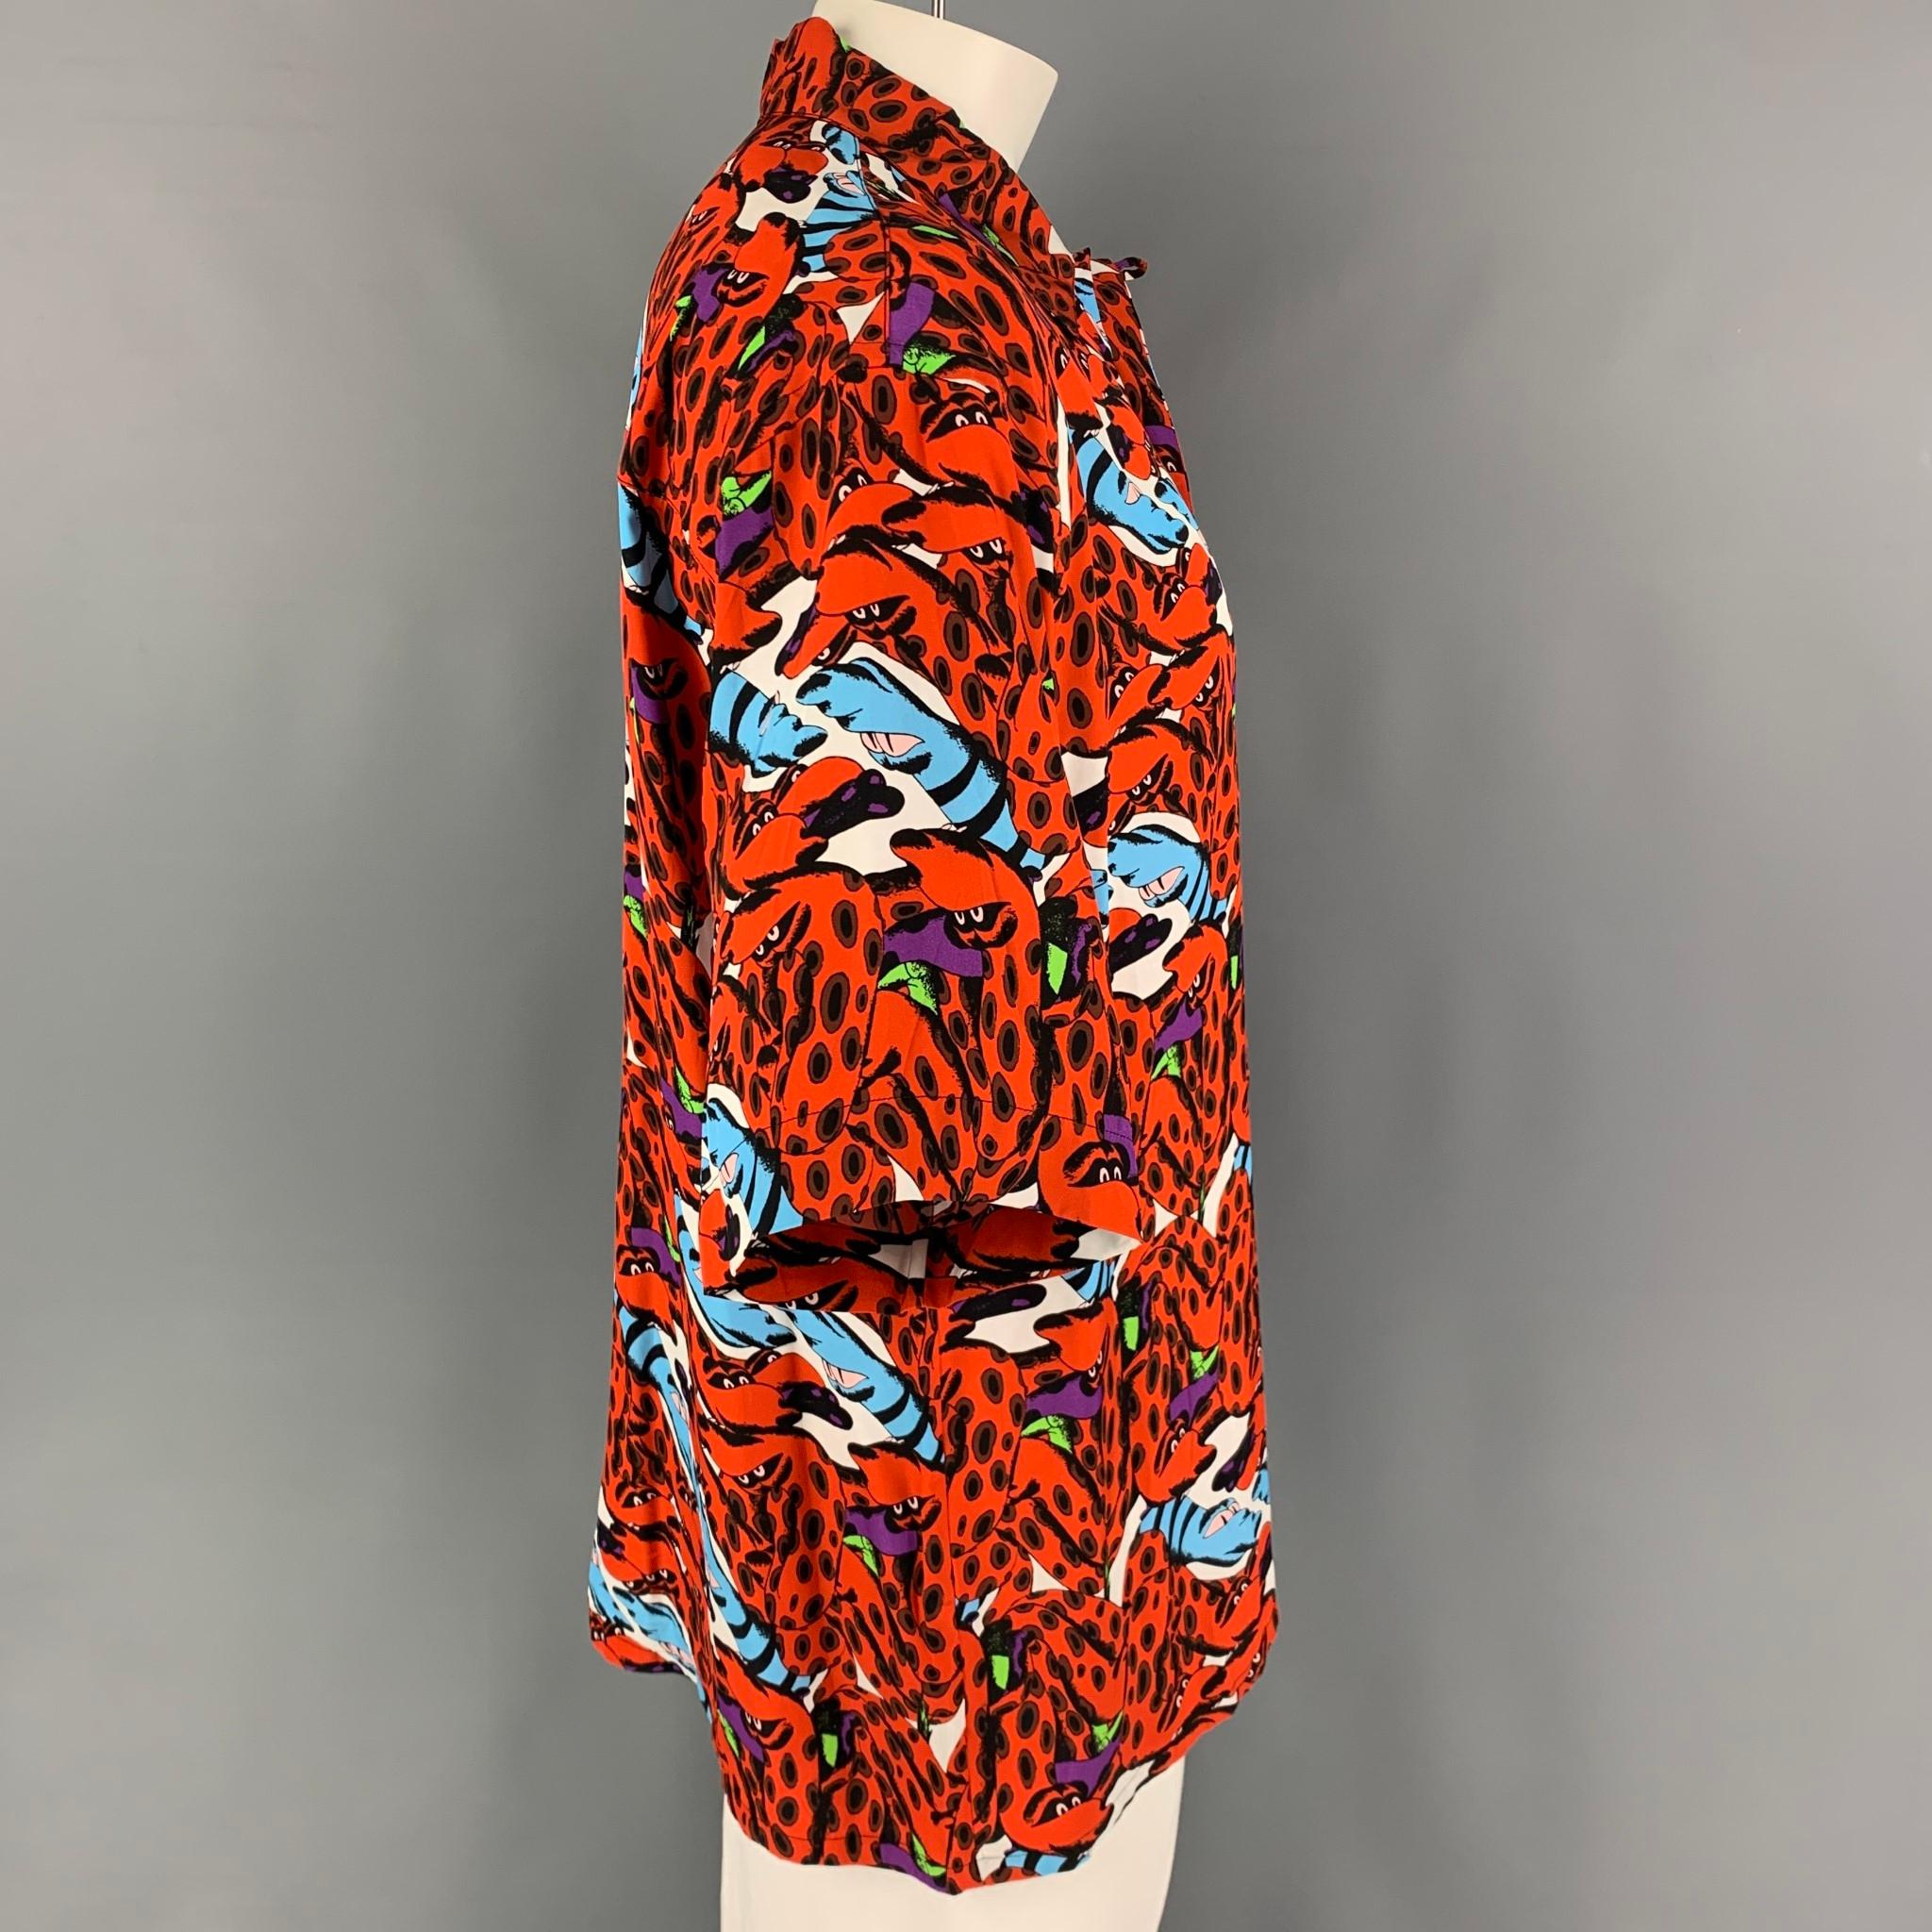 MARNI x BRUNO B BONETTO short sleeve shirt comes in a orange & black print  viscose featuring a camp collar, patch pocket, and a button up closure. Made in Italy. 

Excellent Pre-Owned Condition.
Marked: 50

Measurements:

Shoulder: 22 in.
Chest: 50